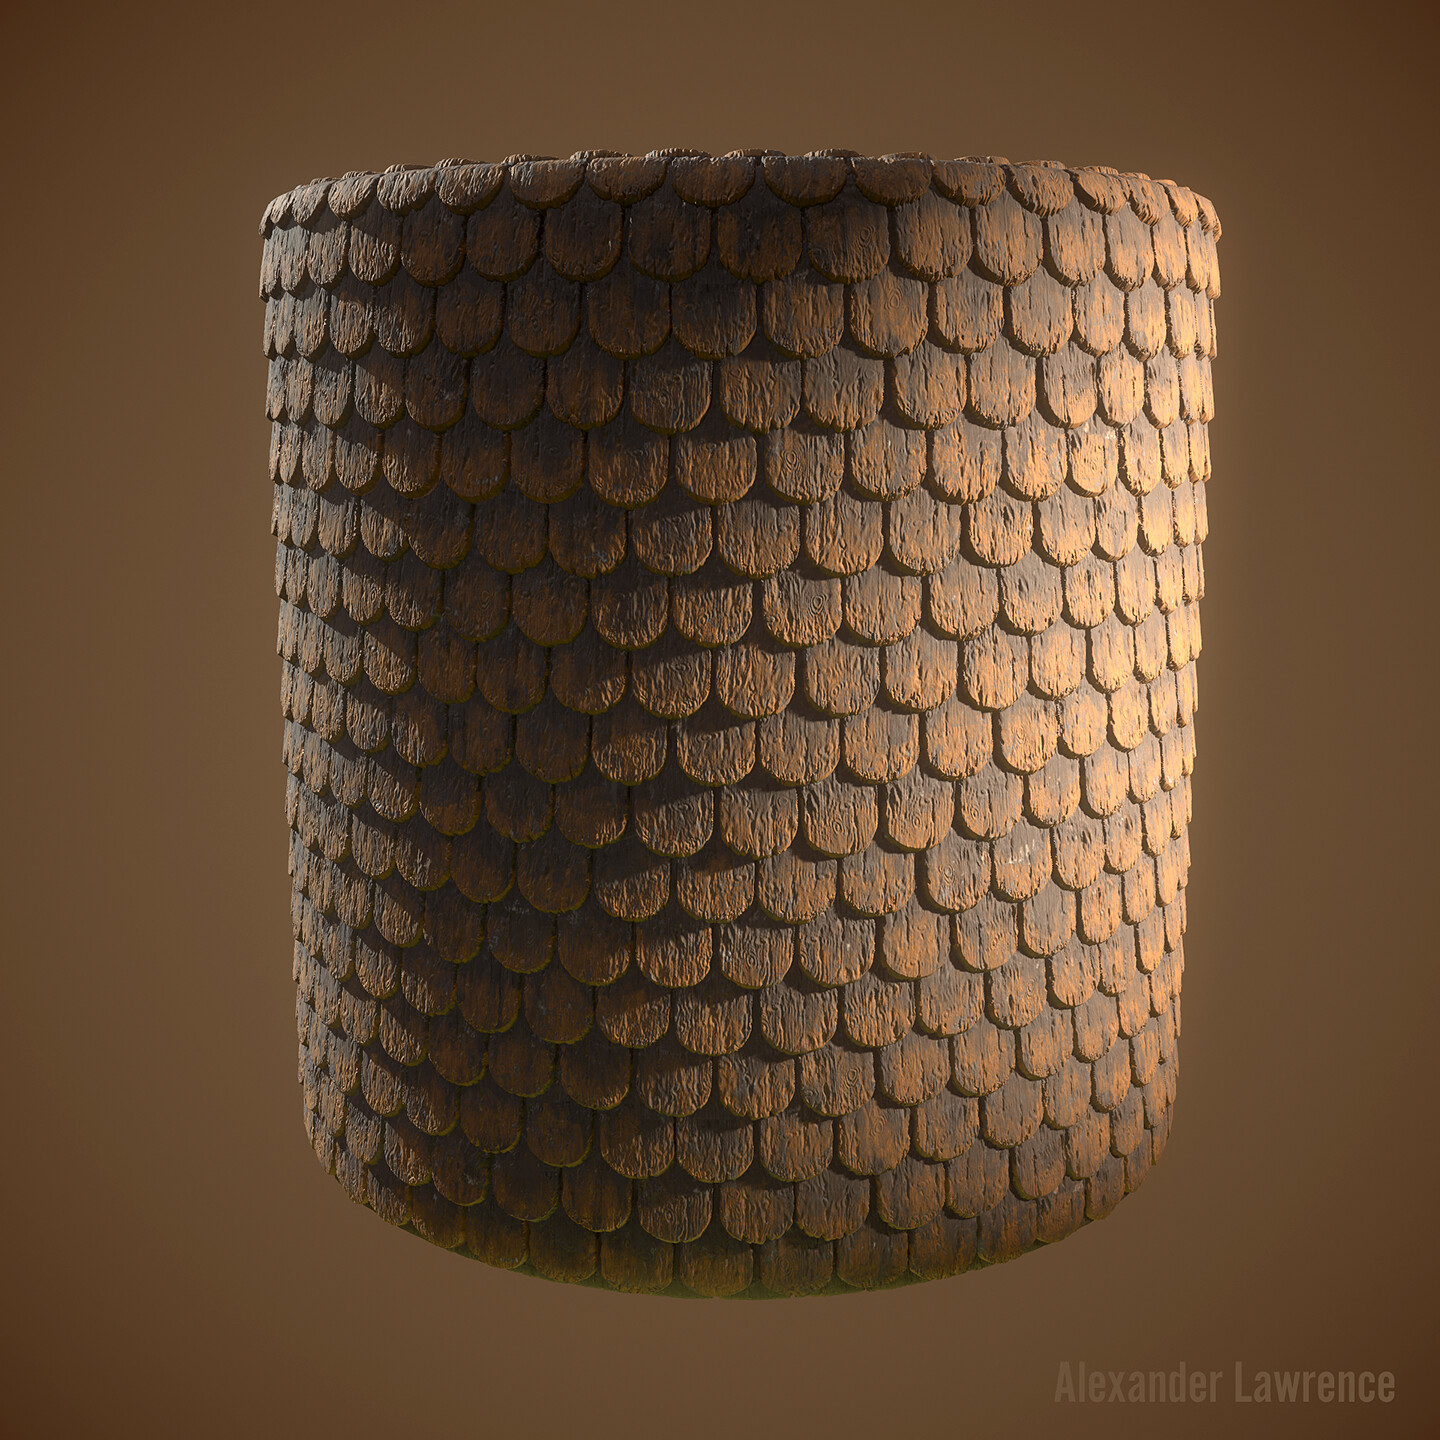 Wooden roof shingles that were painted orange. Created entirely in Substance Designer.